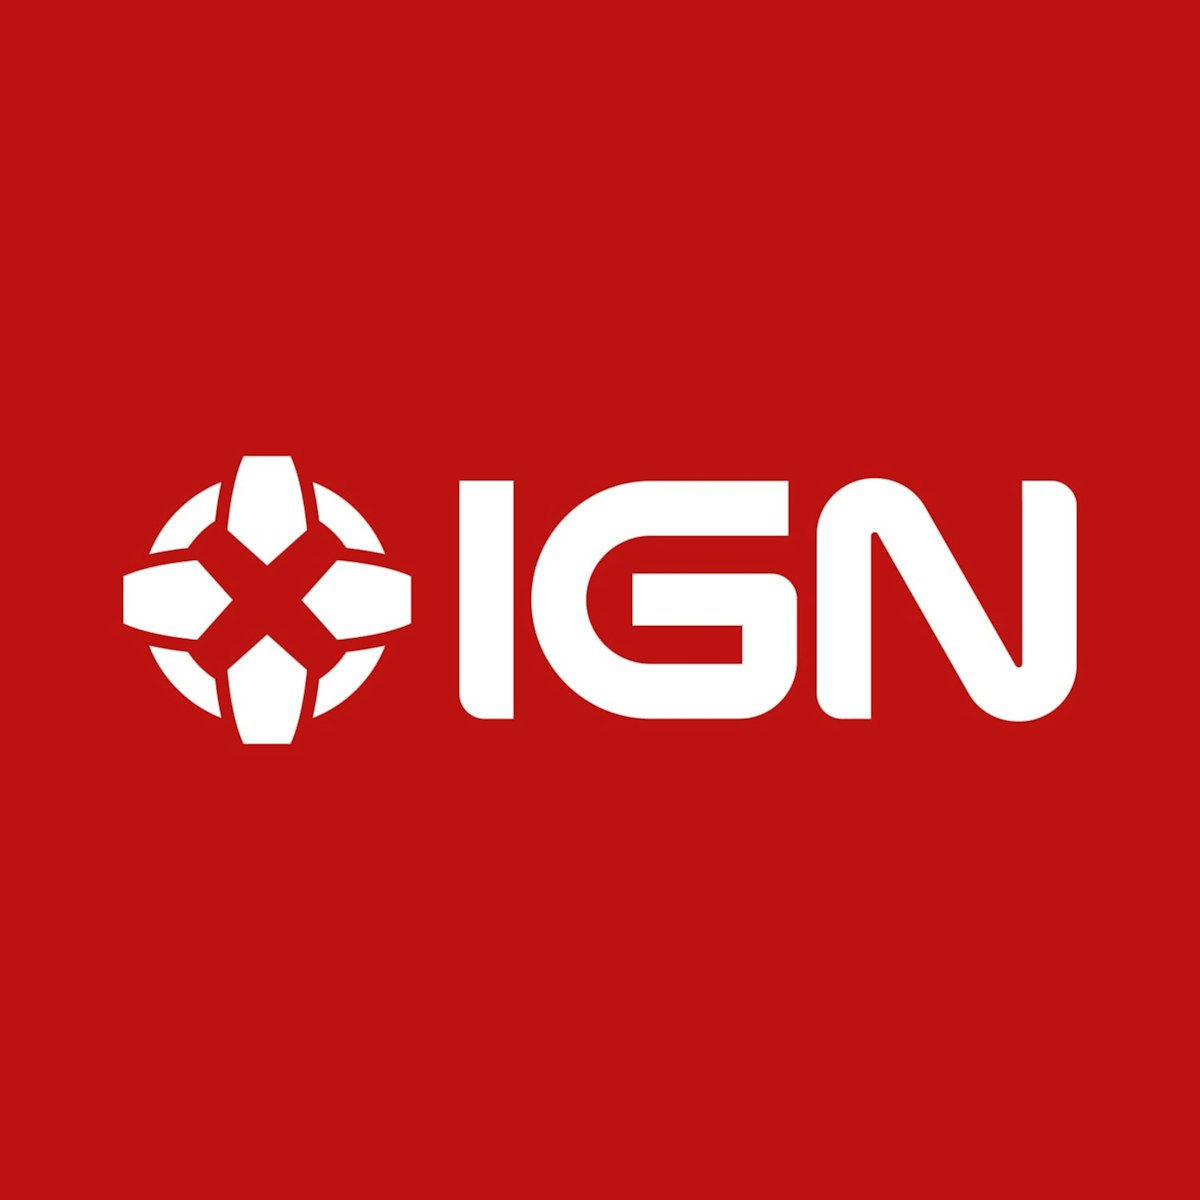 Listen to Podcast Beyond - IGN's PlayStation Show podcast